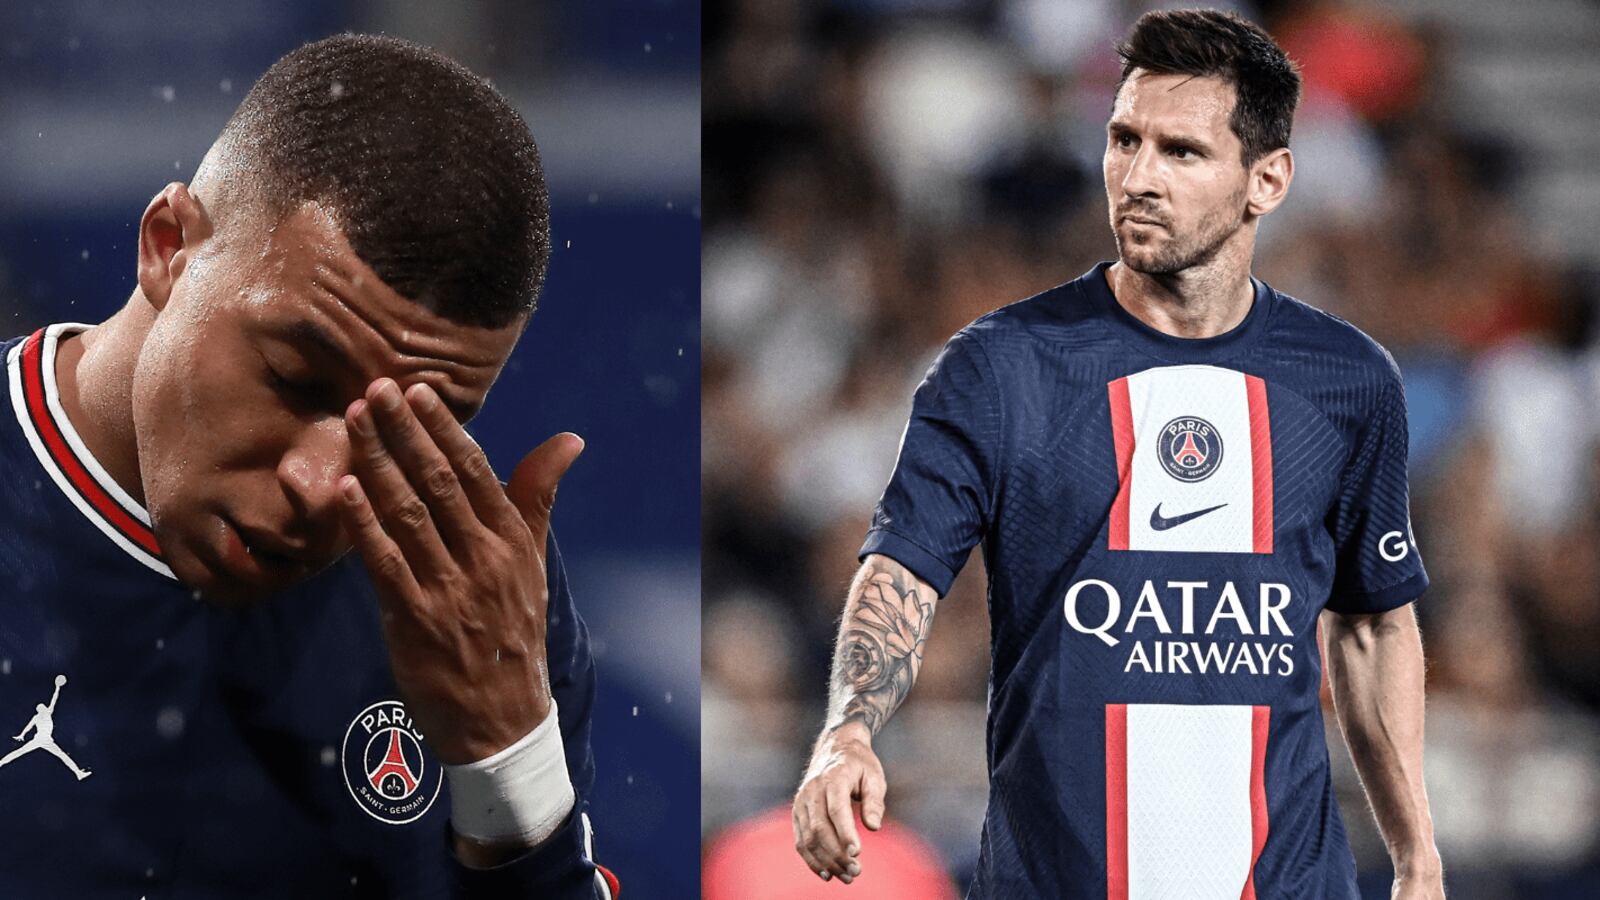 The reason why Lionel Messi prevails over Mbappe in Paris Saint-Germain´s dressing room